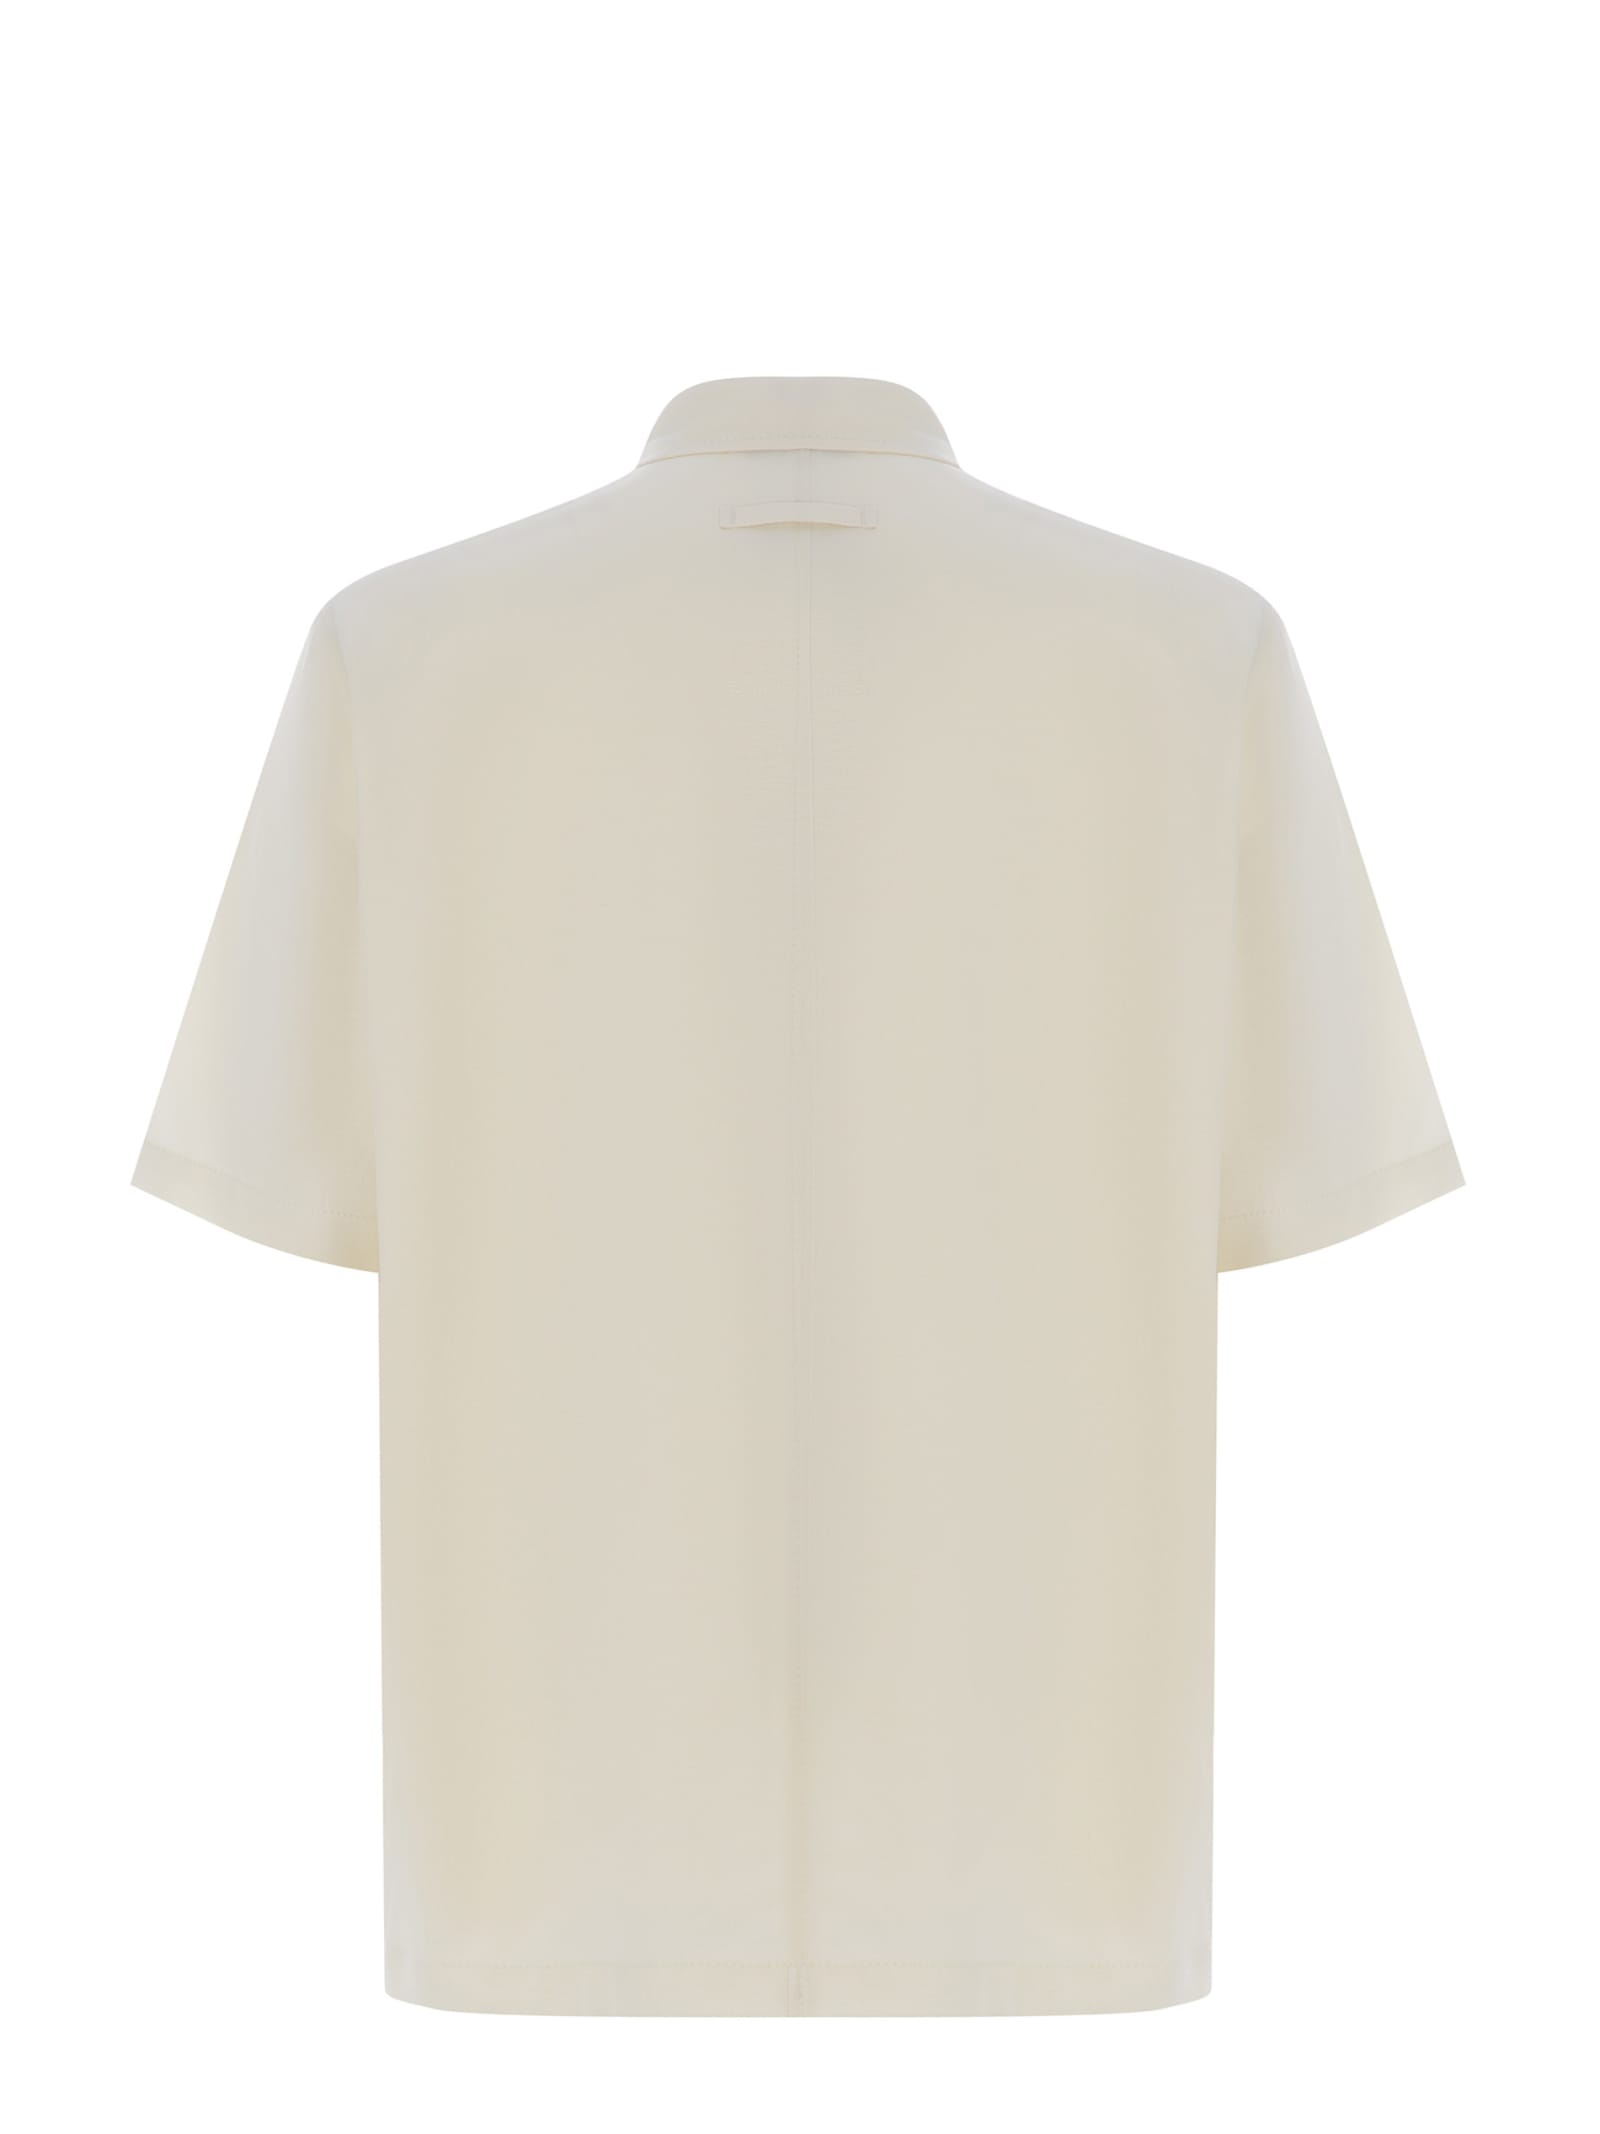 Shop Paolo Pecora Shirt  Made Of Cotton Blend In Beige